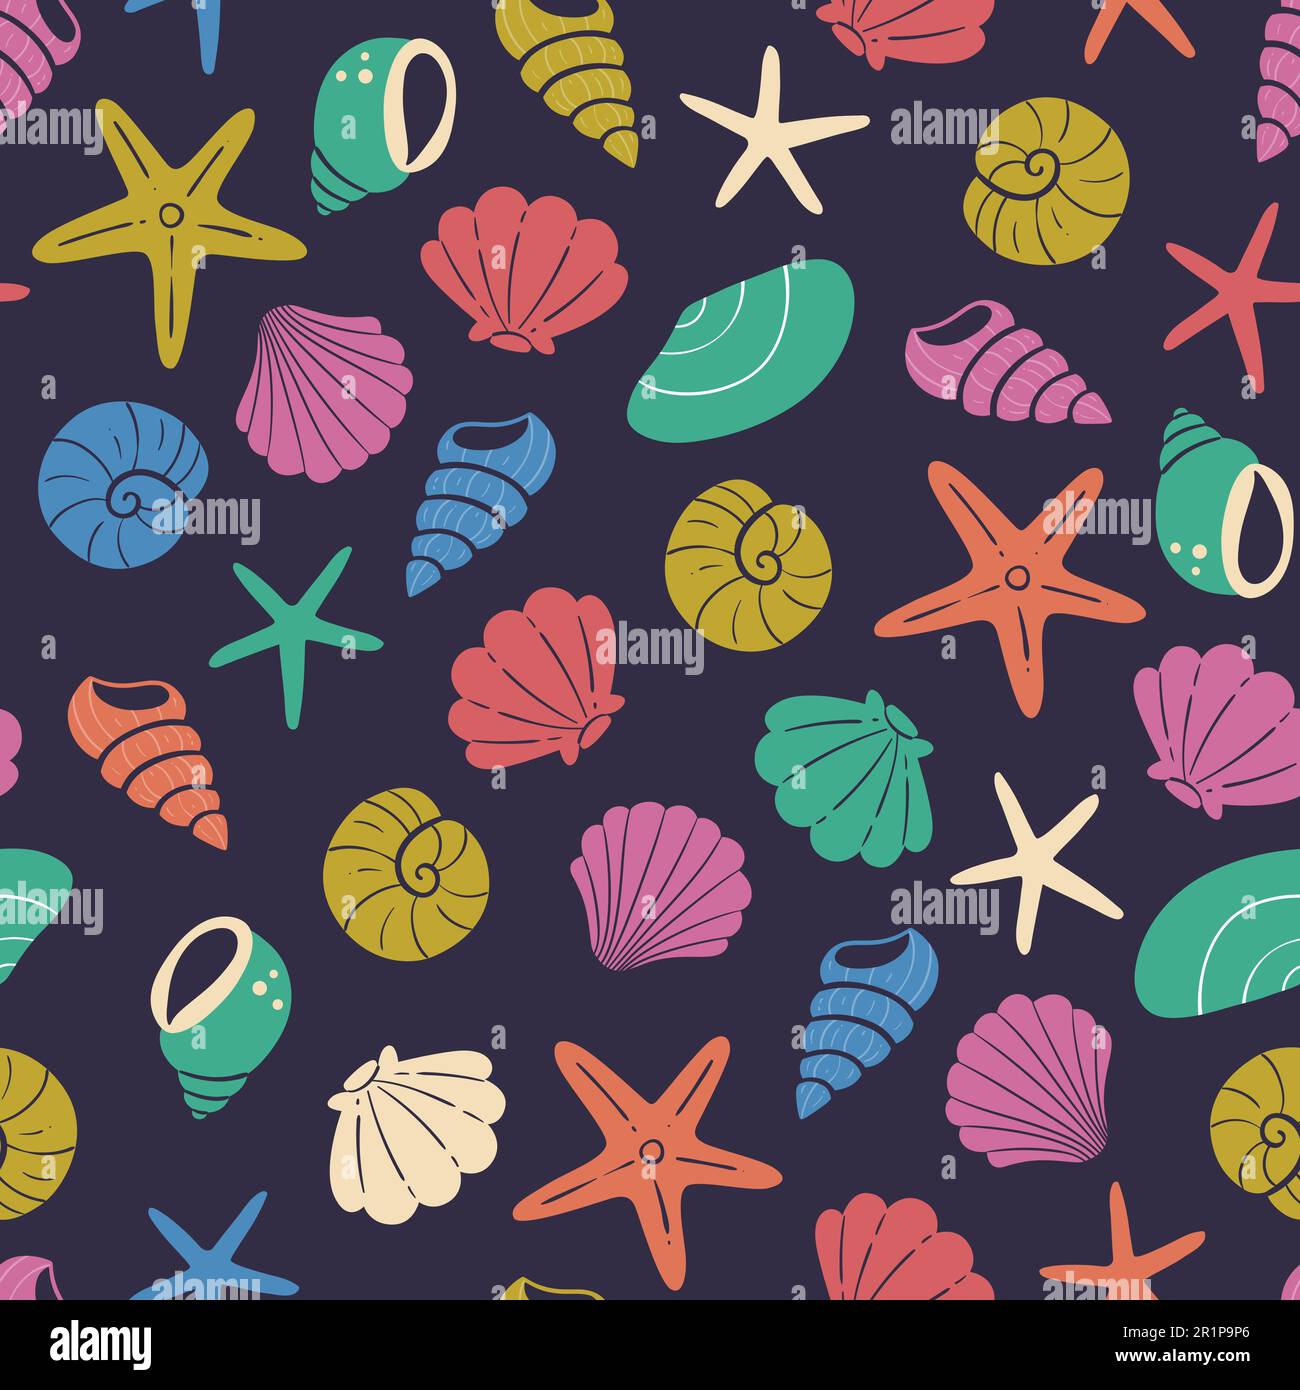 Seashell seamless pattern. Marine background decorative elements isolated on dark background. Hand-drawn colorful vector illustration Stock Vector